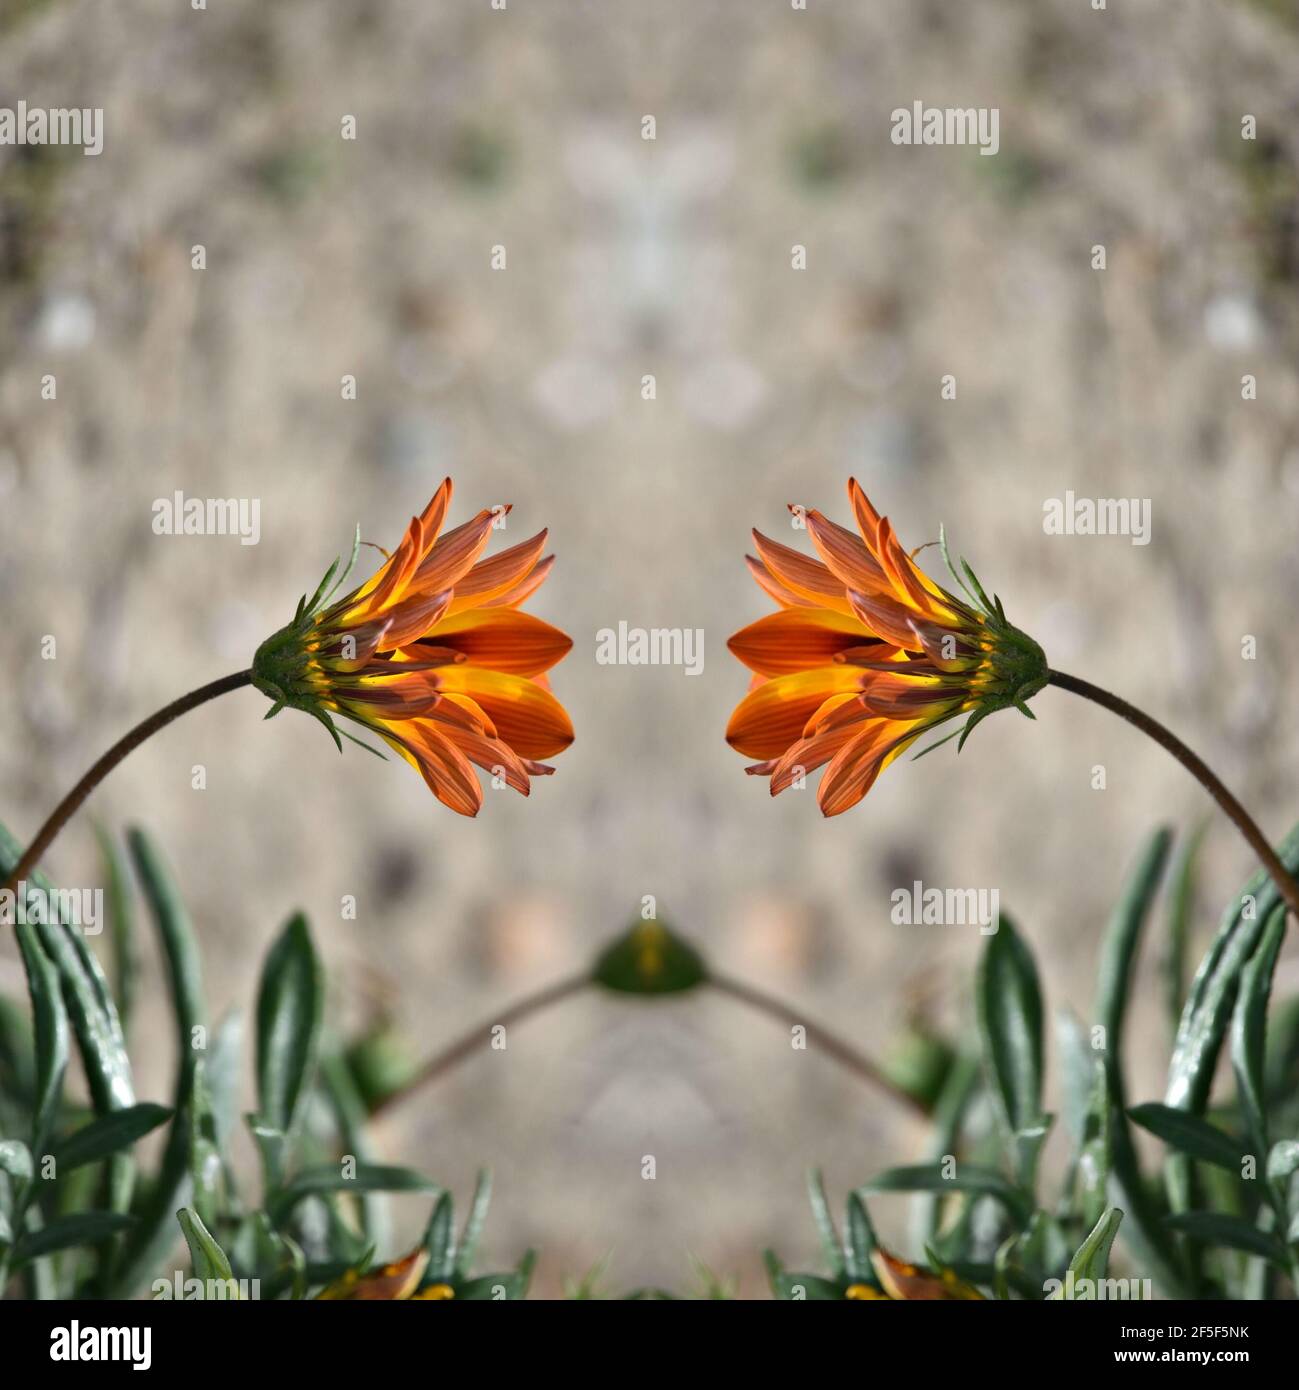 Gazania daisy with bright orange petals on a symmetrical abstract composition. Stock Photo